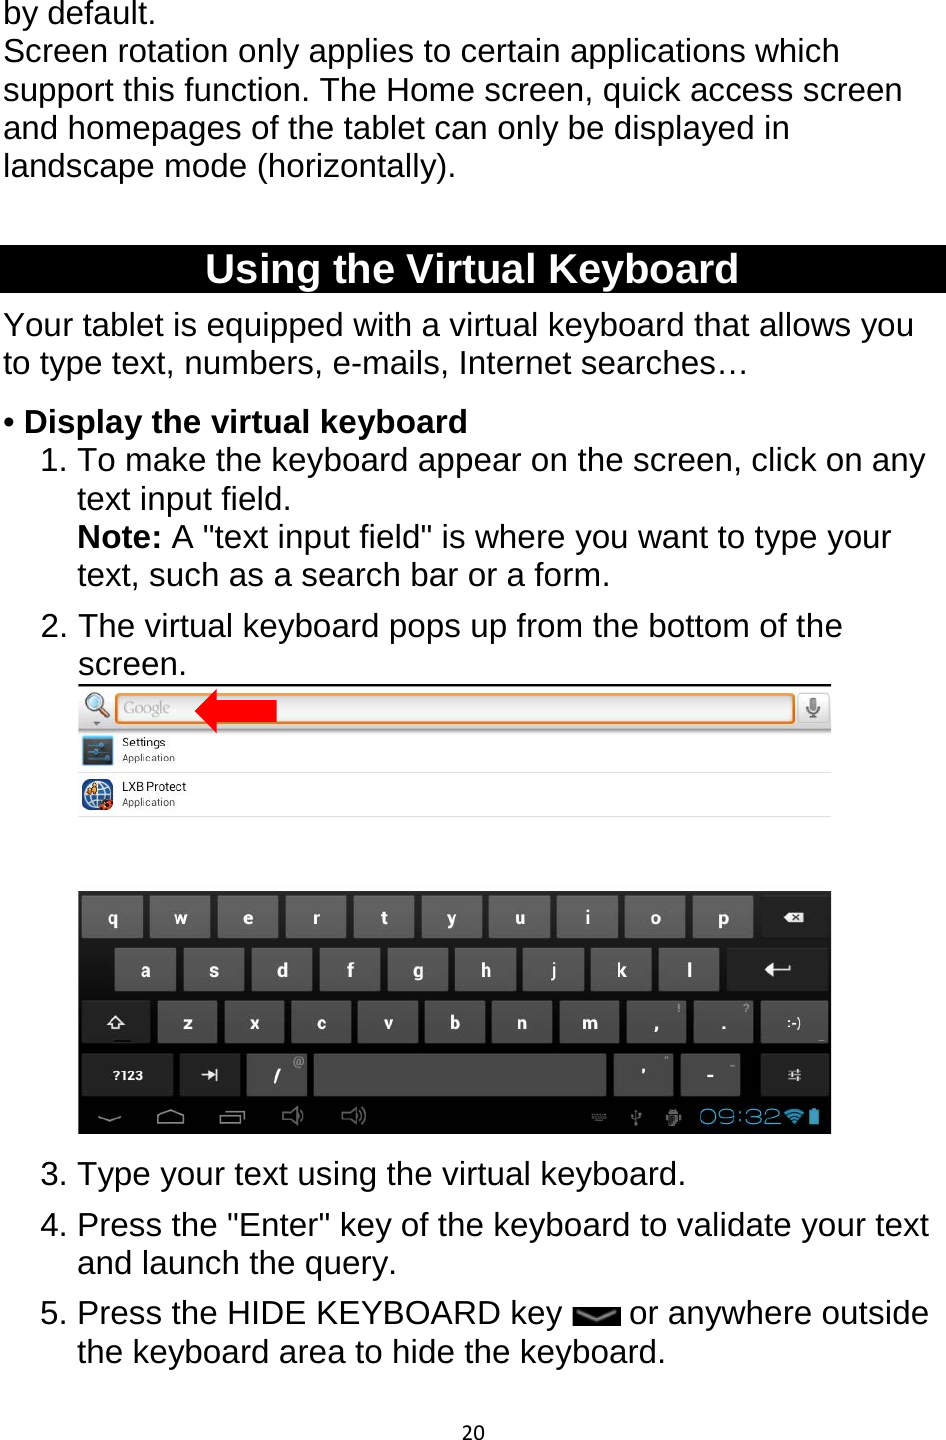 20  by default. Screen rotation only applies to certain applications which support this function. The Home screen, quick access screen and homepages of the tablet can only be displayed in landscape mode (horizontally).  Using the Virtual Keyboard Your tablet is equipped with a virtual keyboard that allows you to type text, numbers, e-mails, Internet searches… • Display the virtual keyboard 1. To make the keyboard appear on the screen, click on any text input field. Note: A &quot;text input field&quot; is where you want to type your text, such as a search bar or a form. 2. The virtual keyboard pops up from the bottom of the screen.  3. Type your text using the virtual keyboard. 4. Press the &quot;Enter&quot; key of the keyboard to validate your text and launch the query. 5. Press the HIDE KEYBOARD key   or anywhere outside the keyboard area to hide the keyboard. 